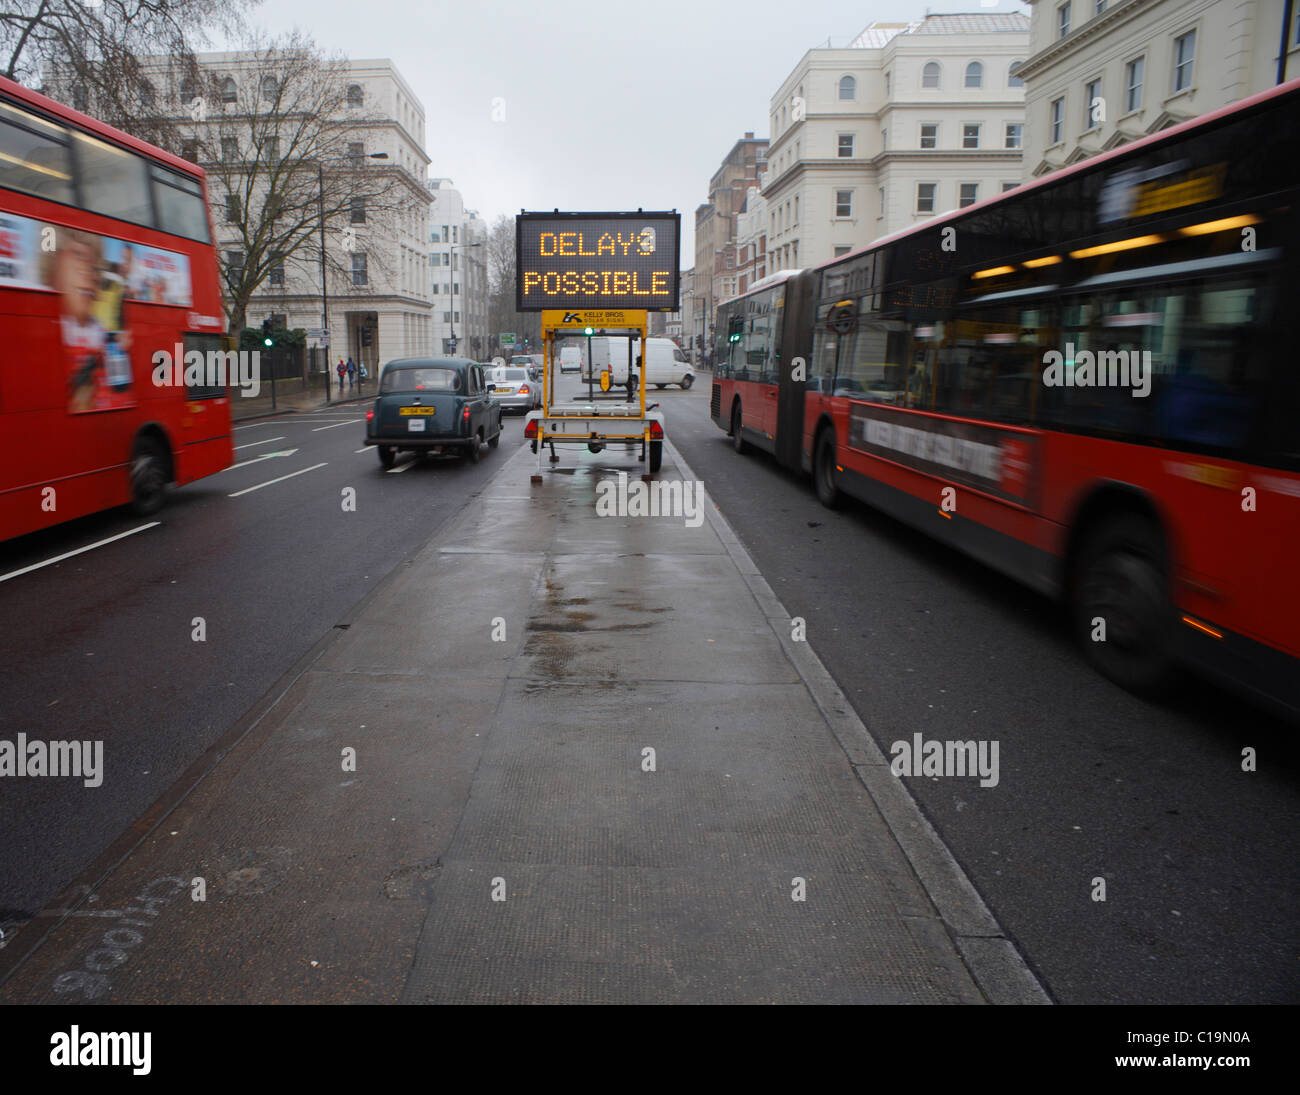 Delays Possible warning, in central London traffic. Stock Photo